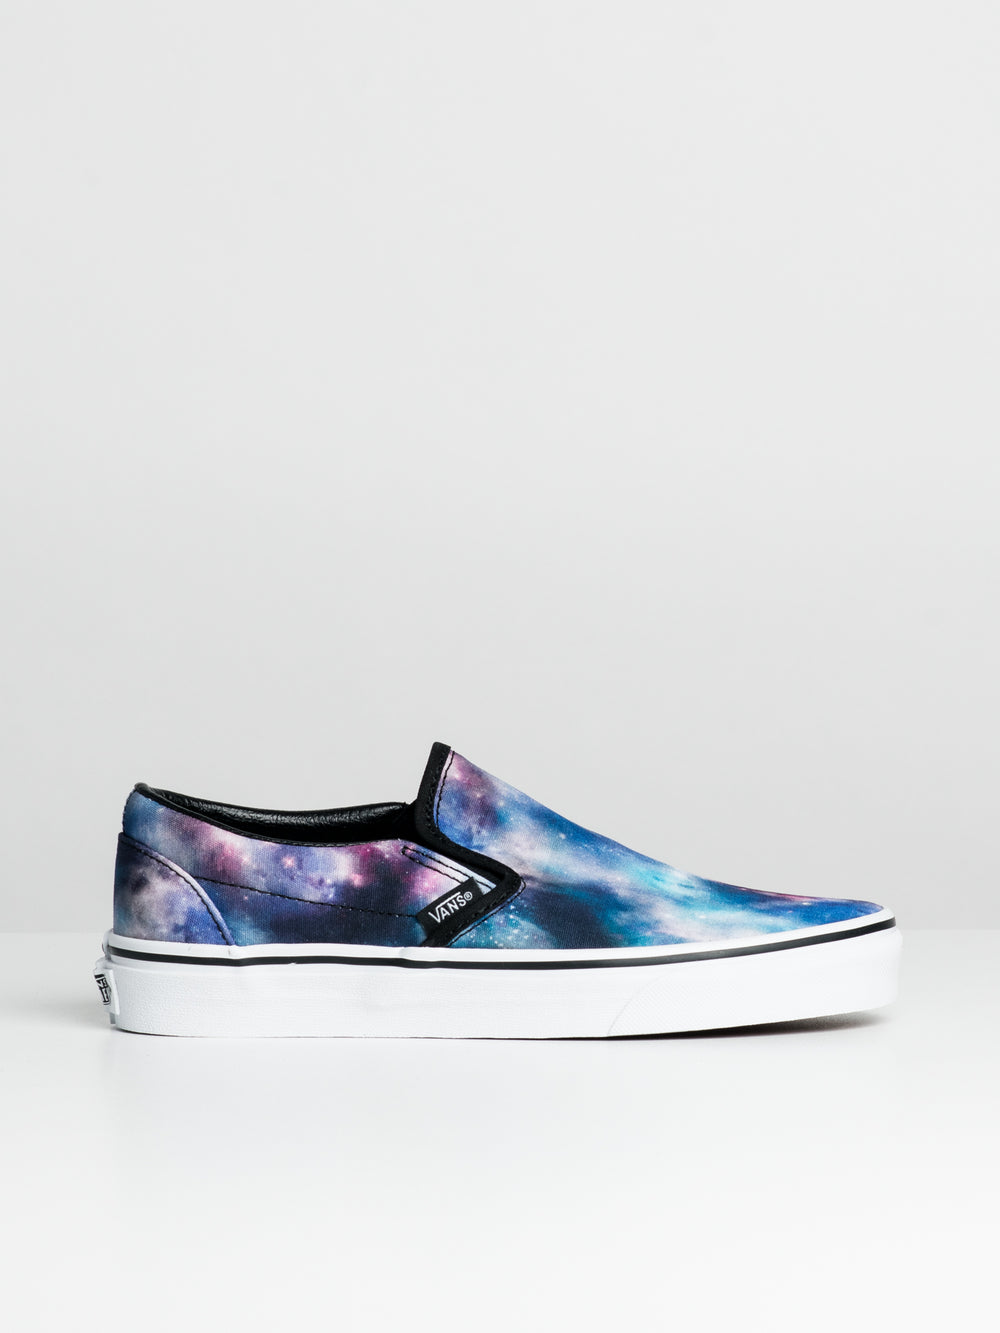 WOMENS VANS CLASSIC SLIP-ON  - CLEARANCE